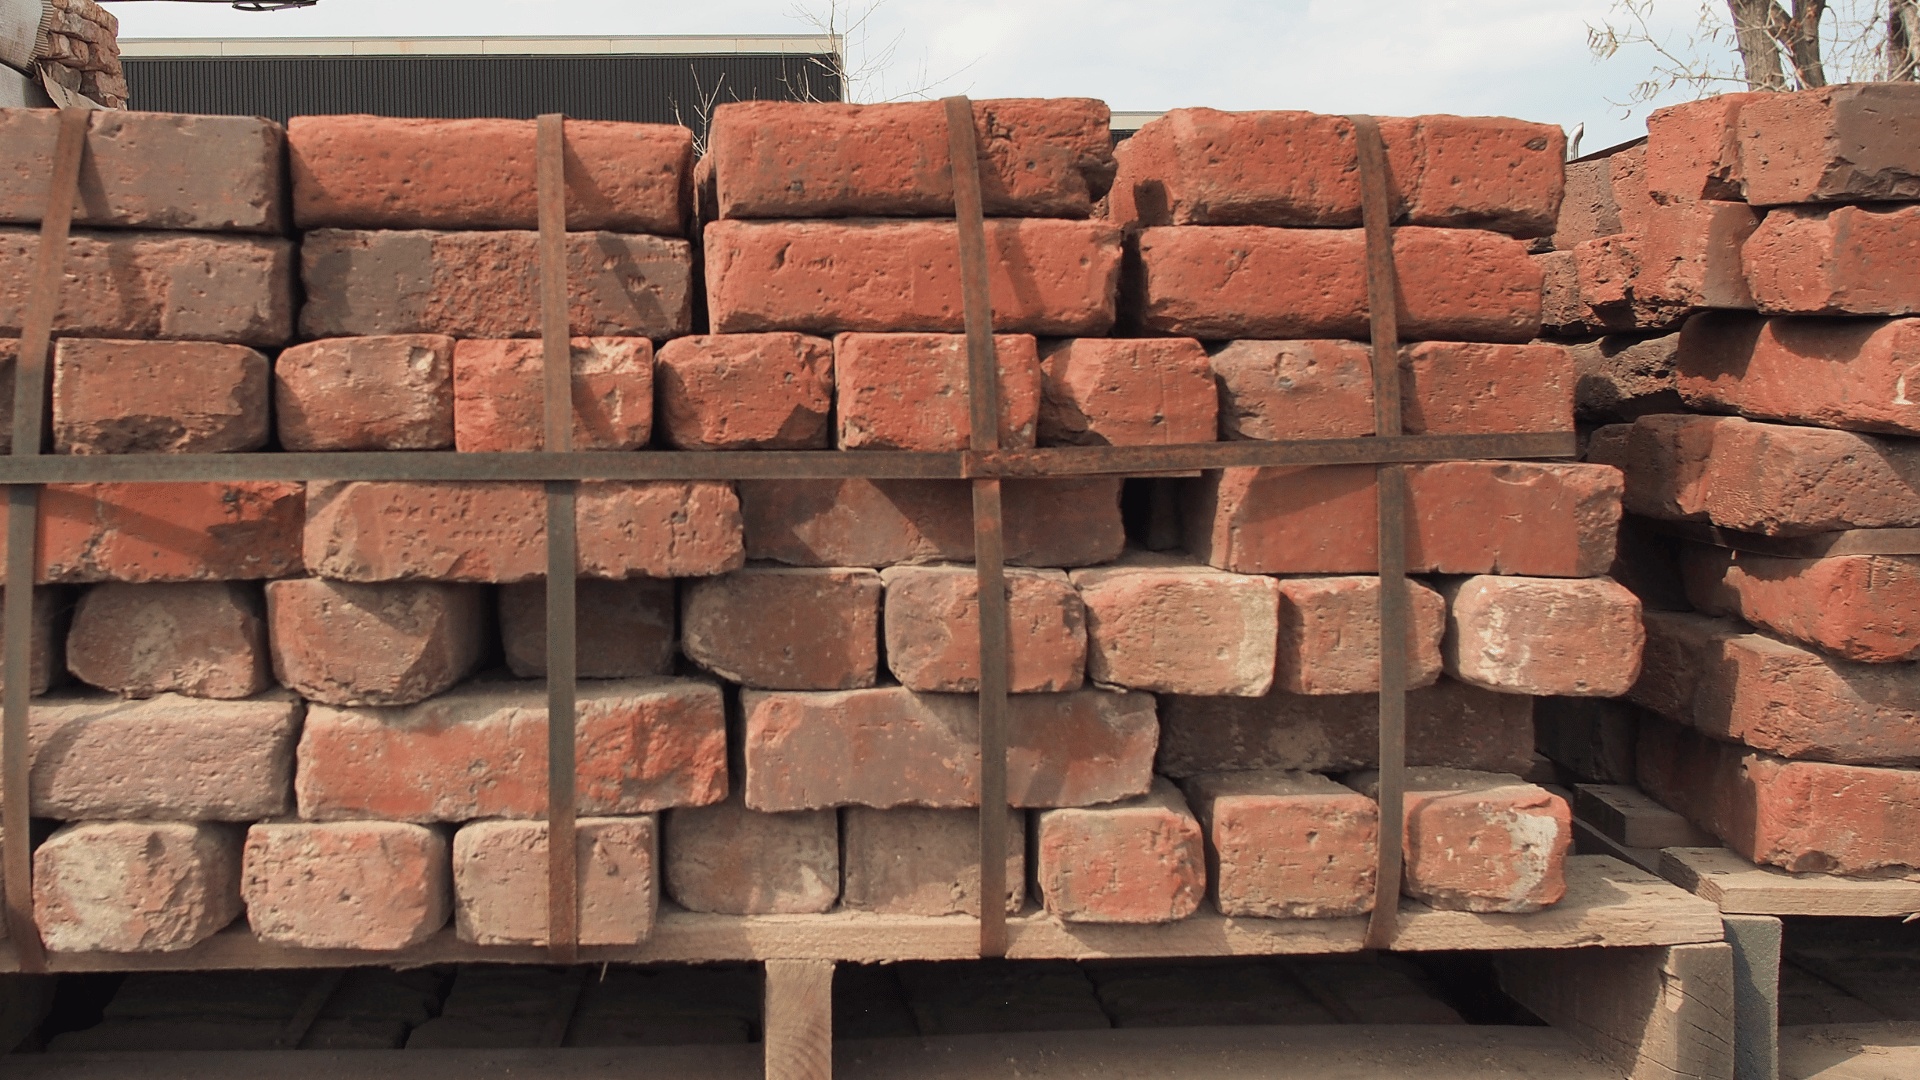 A pallet of high-quality North Chicago bricks, ready for use in construction.